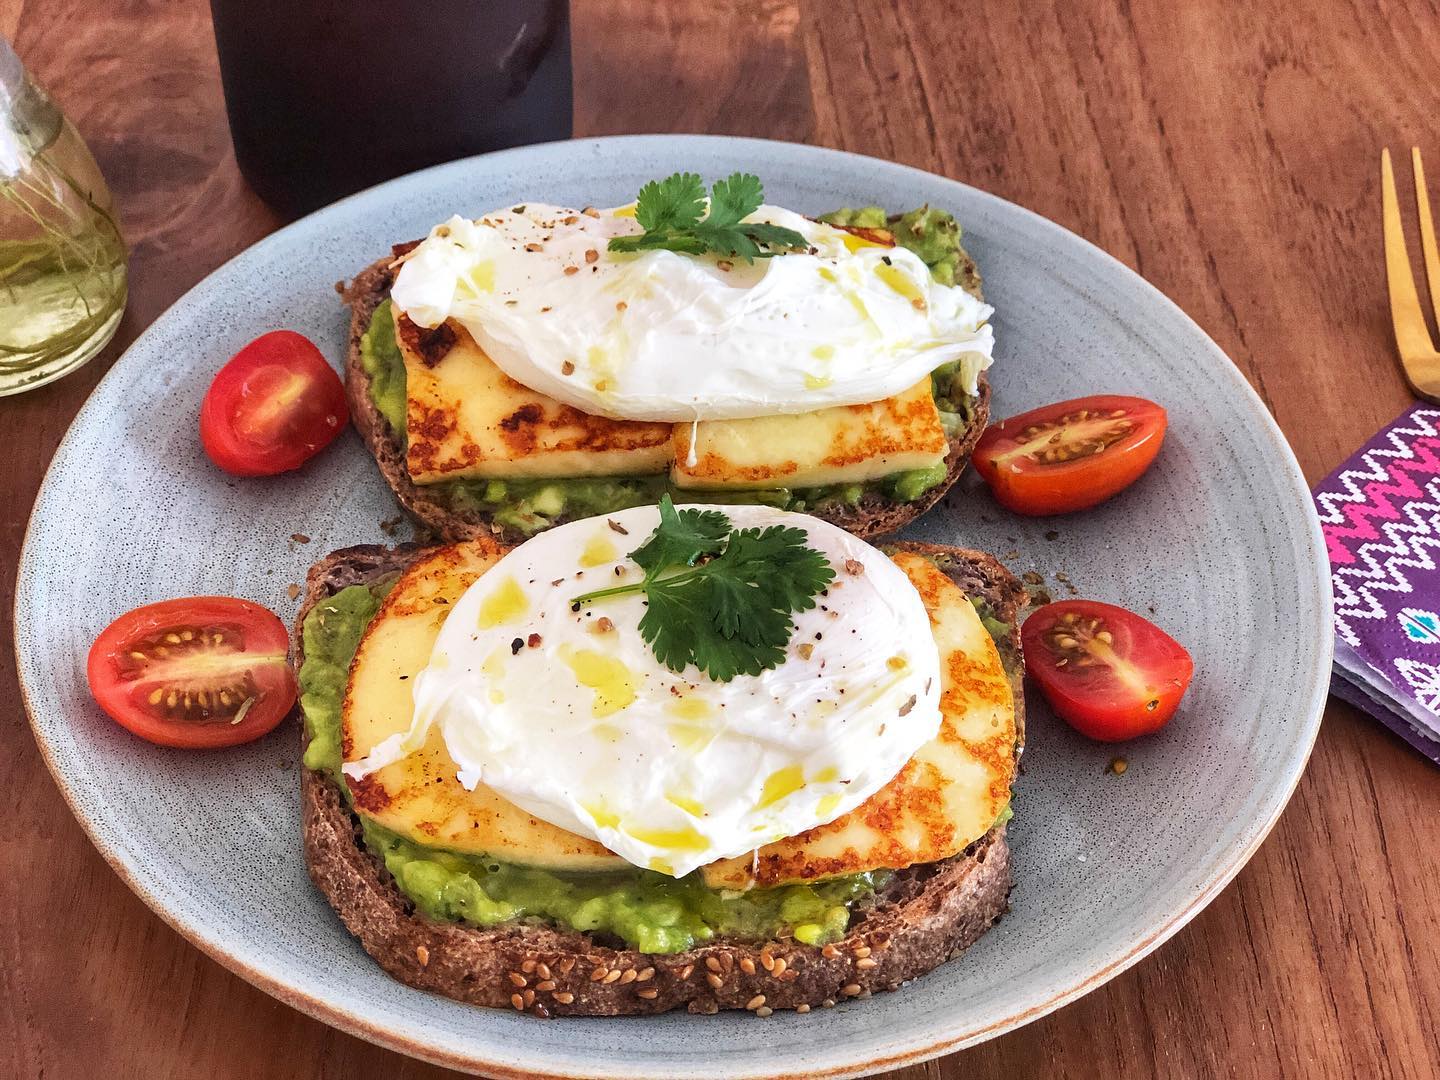 Avo halloumi eggs : this beauty is one of our signature dishes, it’s part of the keto meal plan